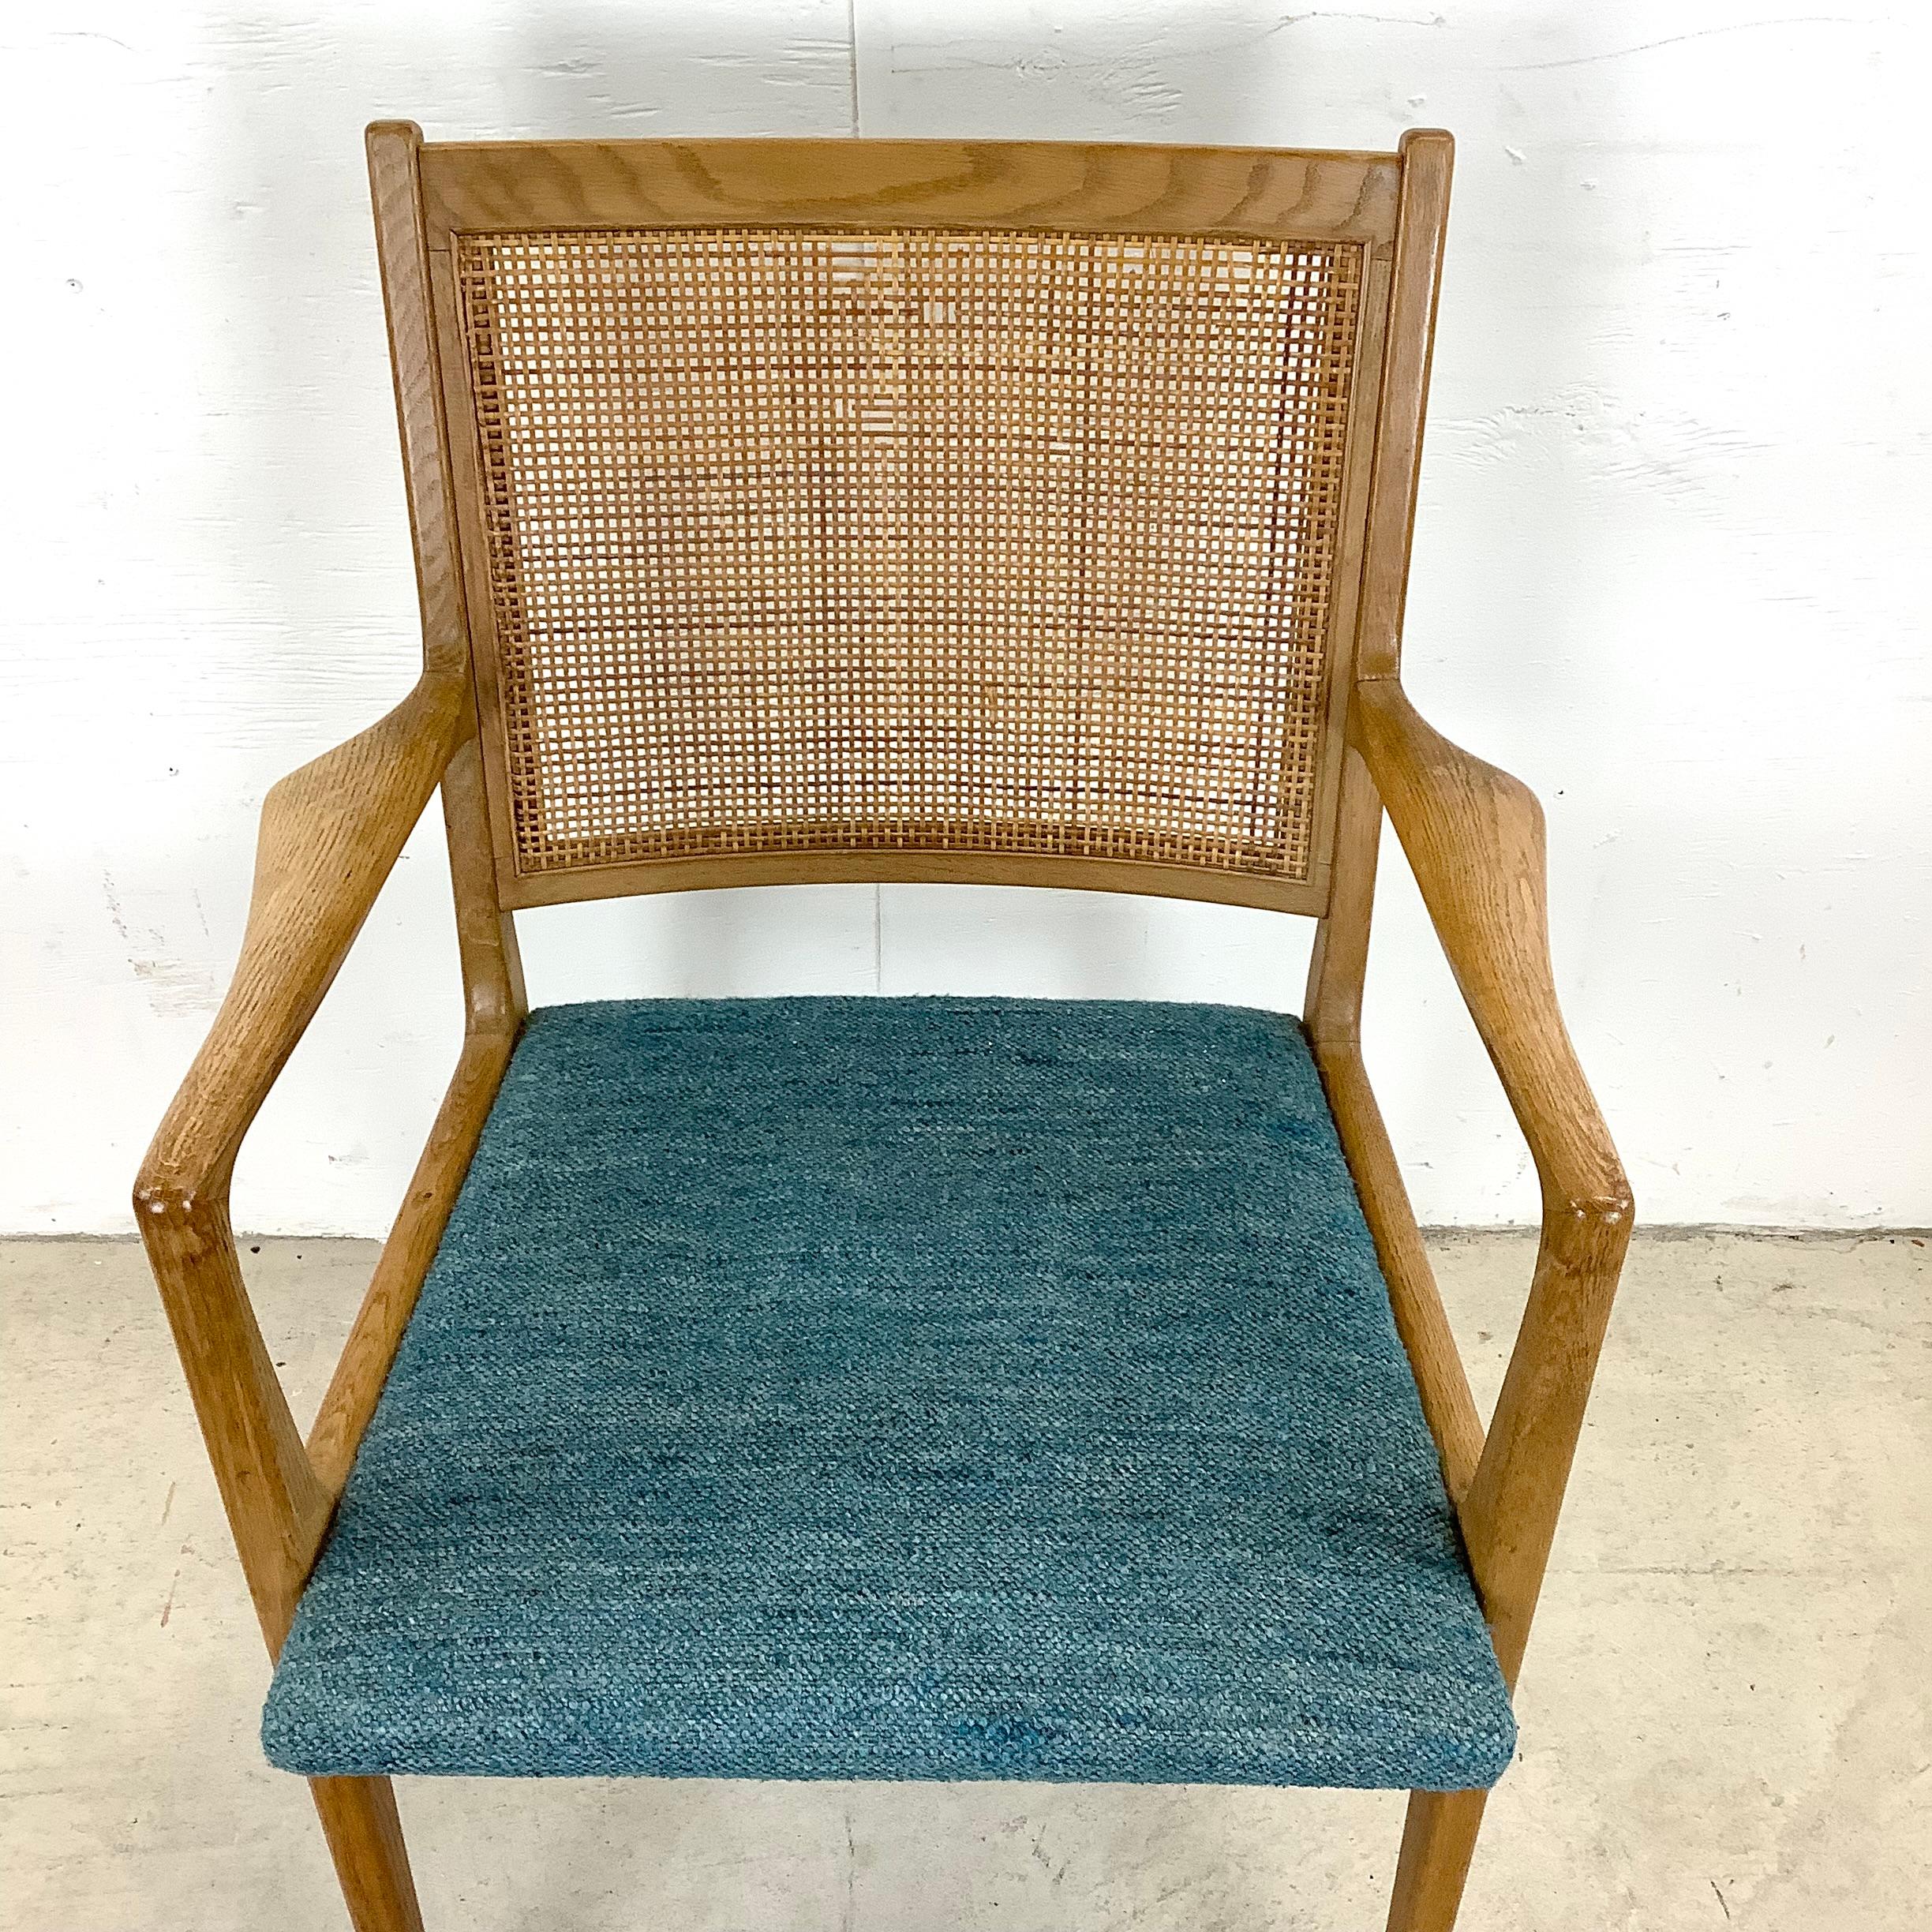 The comfortable proportions and upholstered seat of this vintage armchair make it an ideal fit for use as a striking office desk chair or an eye-catching addition to your dining set. The mid-century modern sculptural qualities of the vintage wood